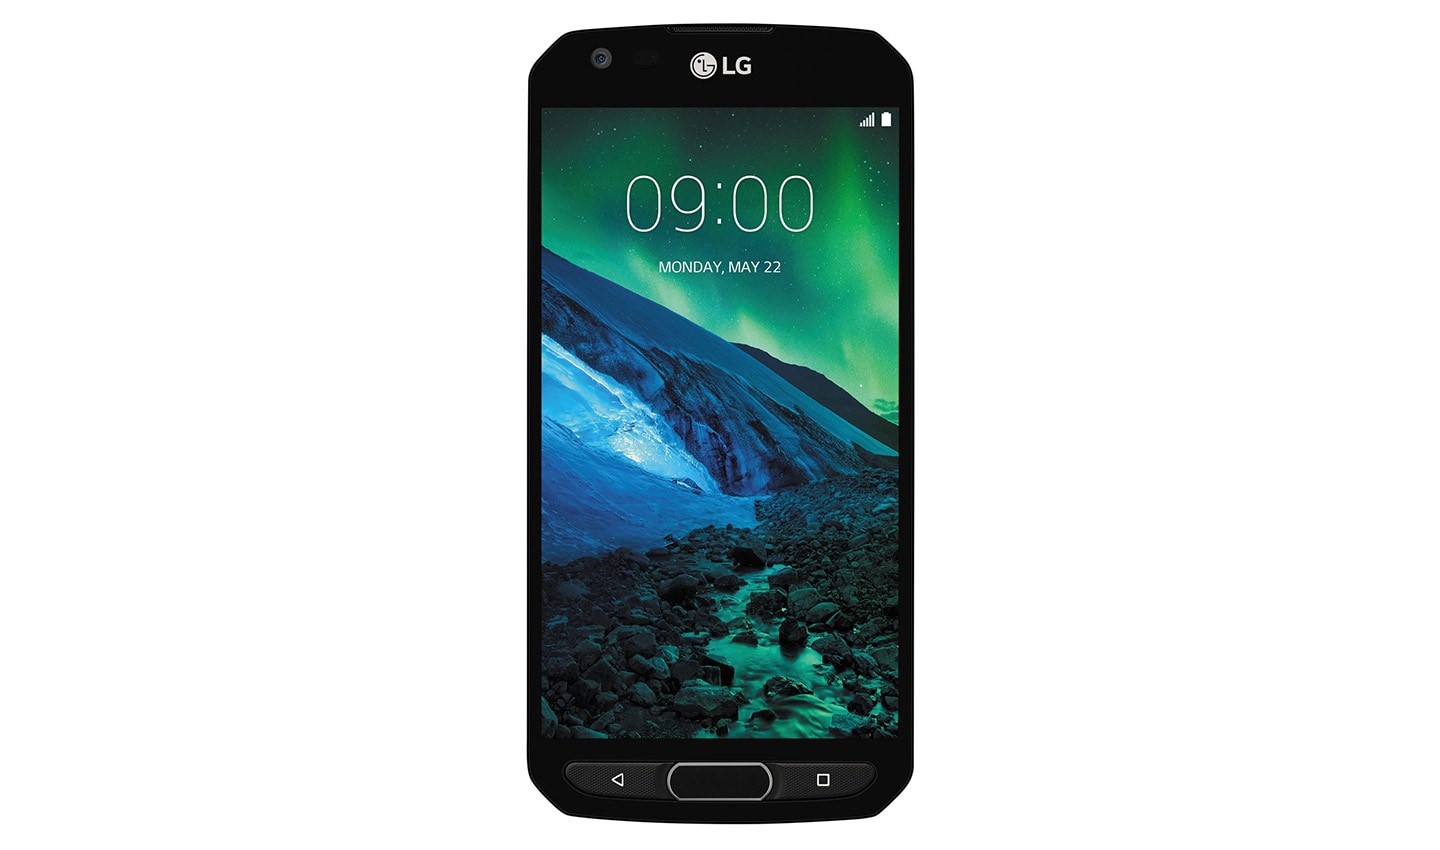 Close-up front view of the LG X Venture smartphone